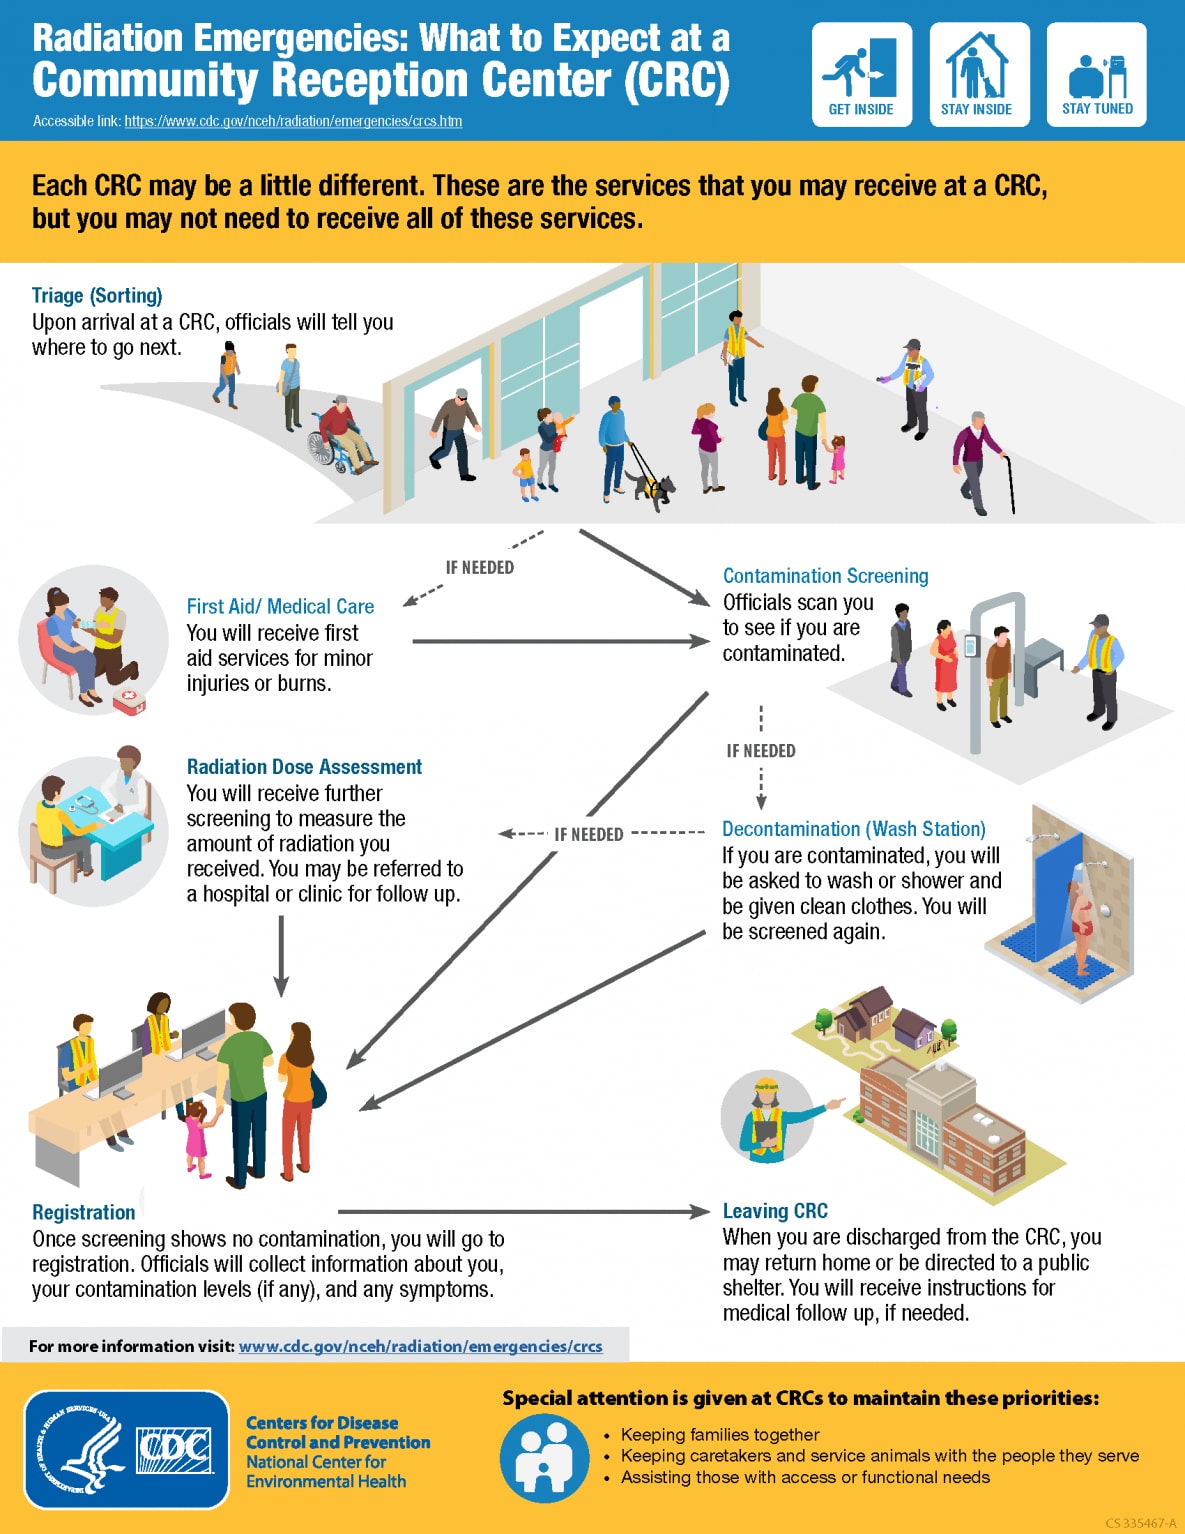 Radiation Emergencies: what to Expect at a Community Reception Center (CRC) infographic with a long description